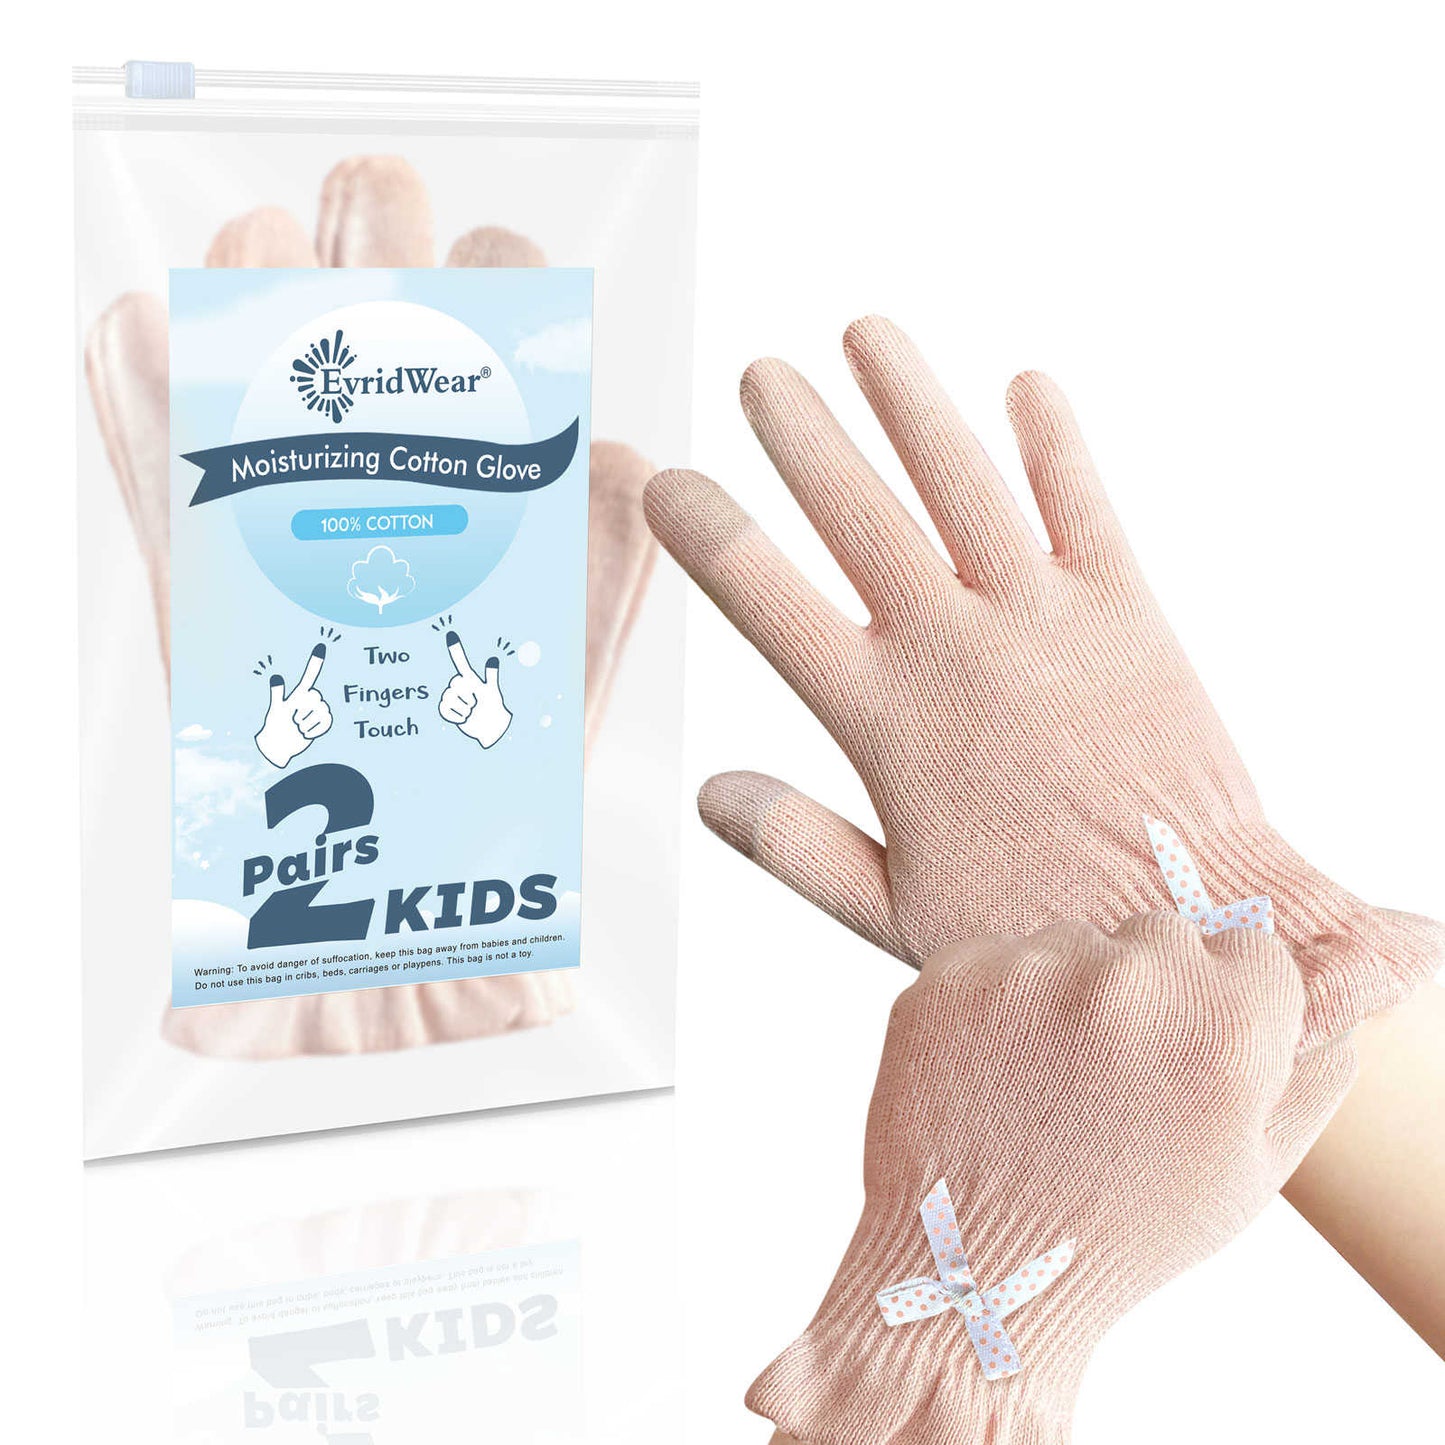 EvridWear Kid's Beauty Cotton Gloves with Touchscreen, Eczema, Dry Hands, Hand Care, Day and Night Moisturizing,(2 Pairs)